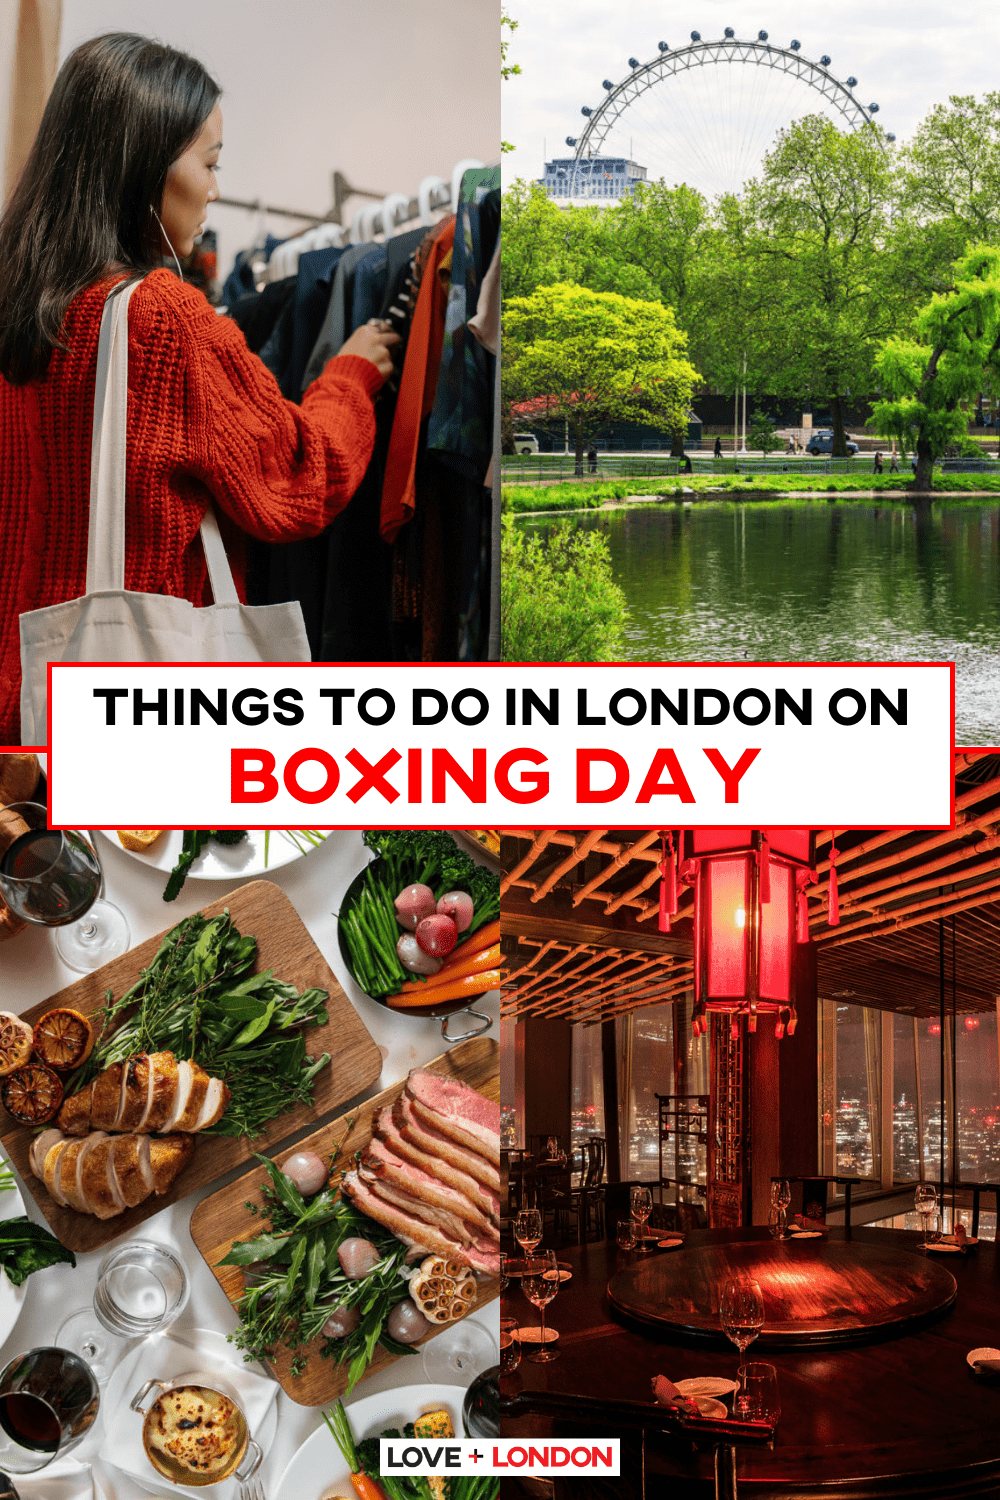 Things to Do in London on Boxing Day